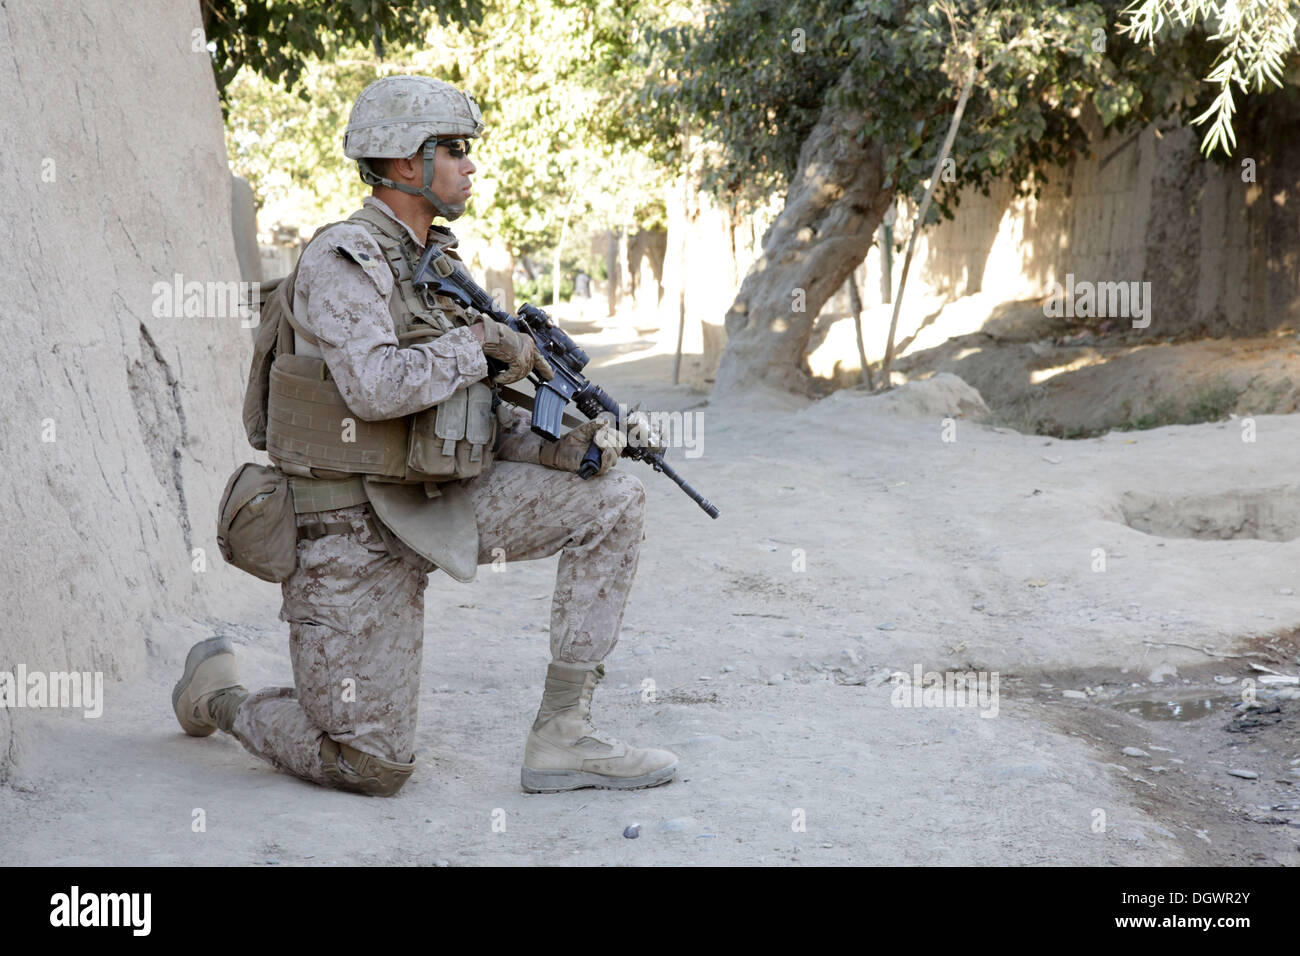 U.S. Marine Corps Staff Sgt. Derrick Warren, a platoon sergeant with India Company, 3rd Battalion, 7th Marine Regiment, kneels during a patrol near Forward Operating Base Musa Qala, Helmand province, Afghanistan, Oct. 20, 2013. The Marines with 3/7 patrol Stock Photo